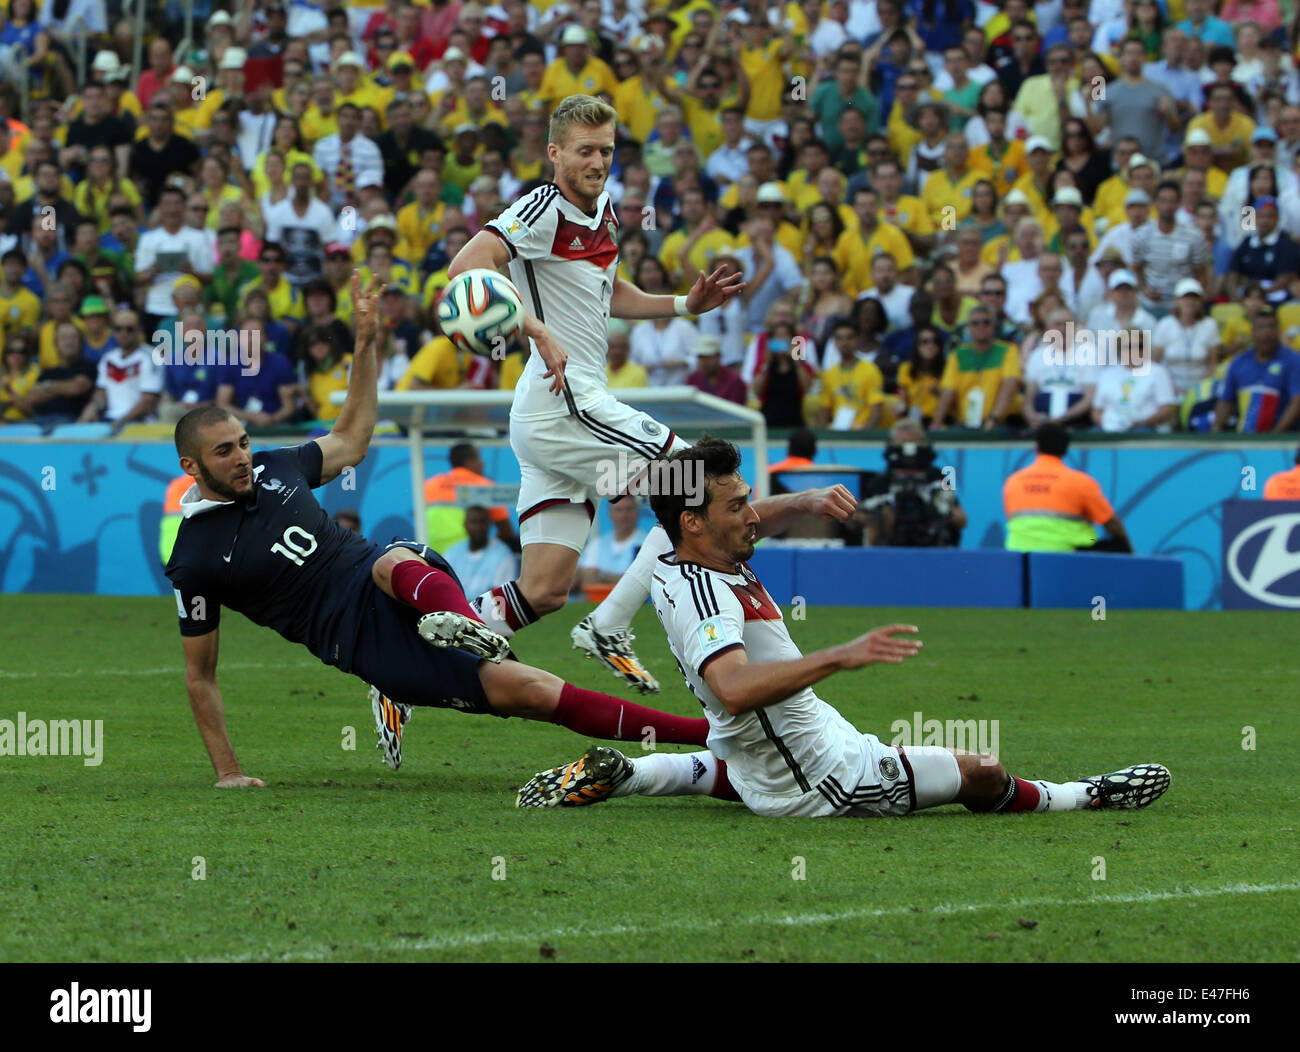 Rio De Janerio, Brazil. 04th July, 2014. FIFA World Cup 2014 quarter final soccer match between France and Germany at Estadio do Maracana in Rio de Janeiro, Brazil. Benzema blocked by Hummels Credit:  Action Plus Sports/Alamy Live News Stock Photo